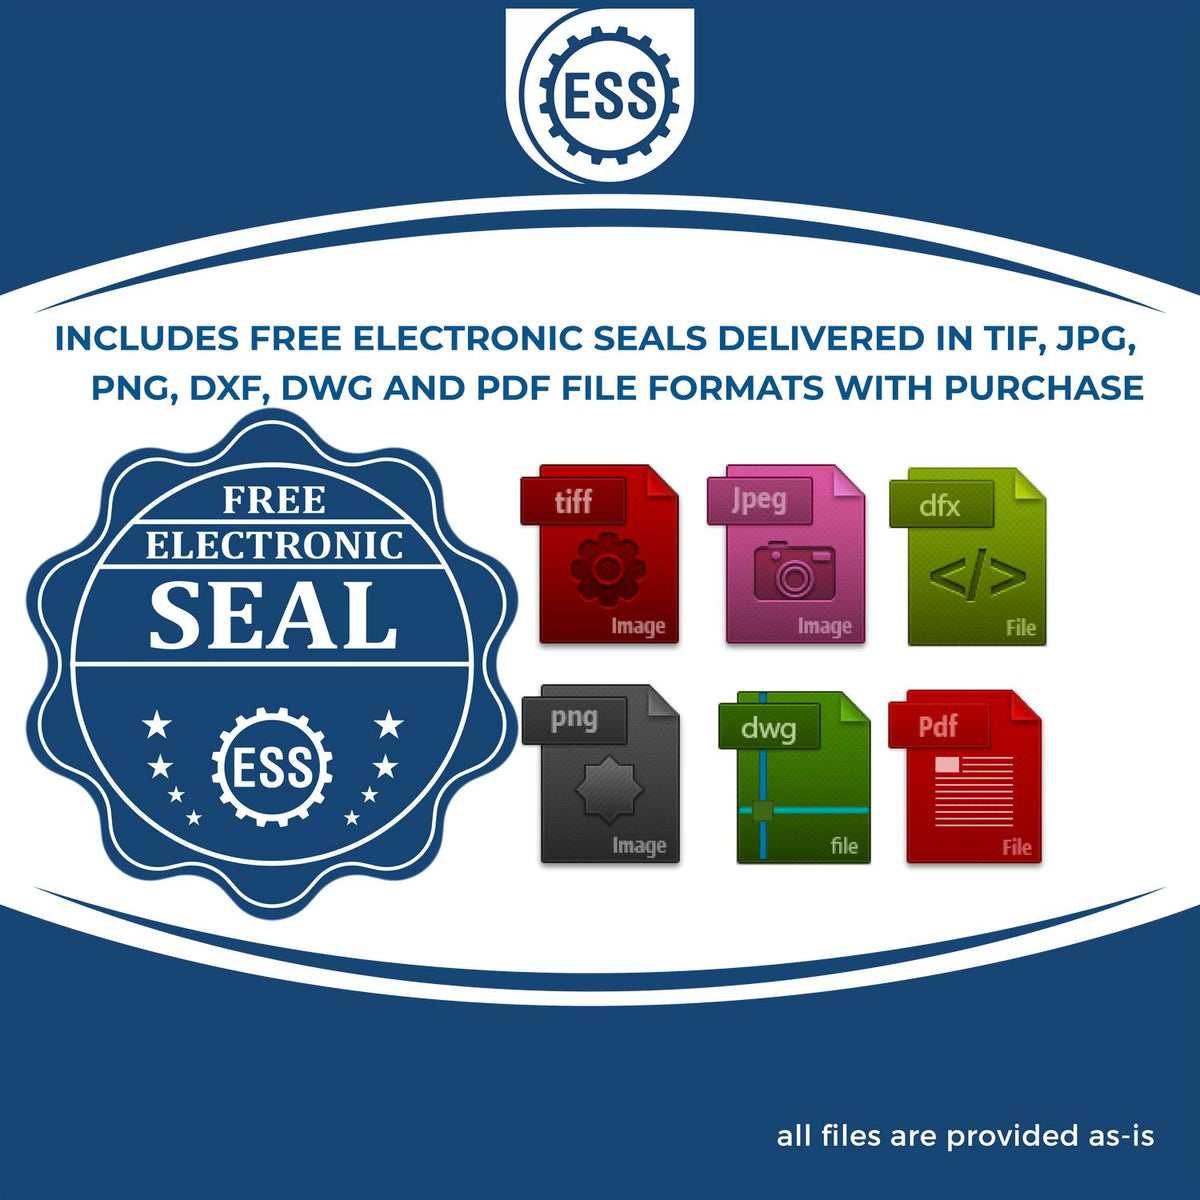 An infographic for the free electronic seal for the Soft Idaho Professional Engineer Seal illustrating the different file type icons such as DXF, DWG, TIF, JPG and PNG.